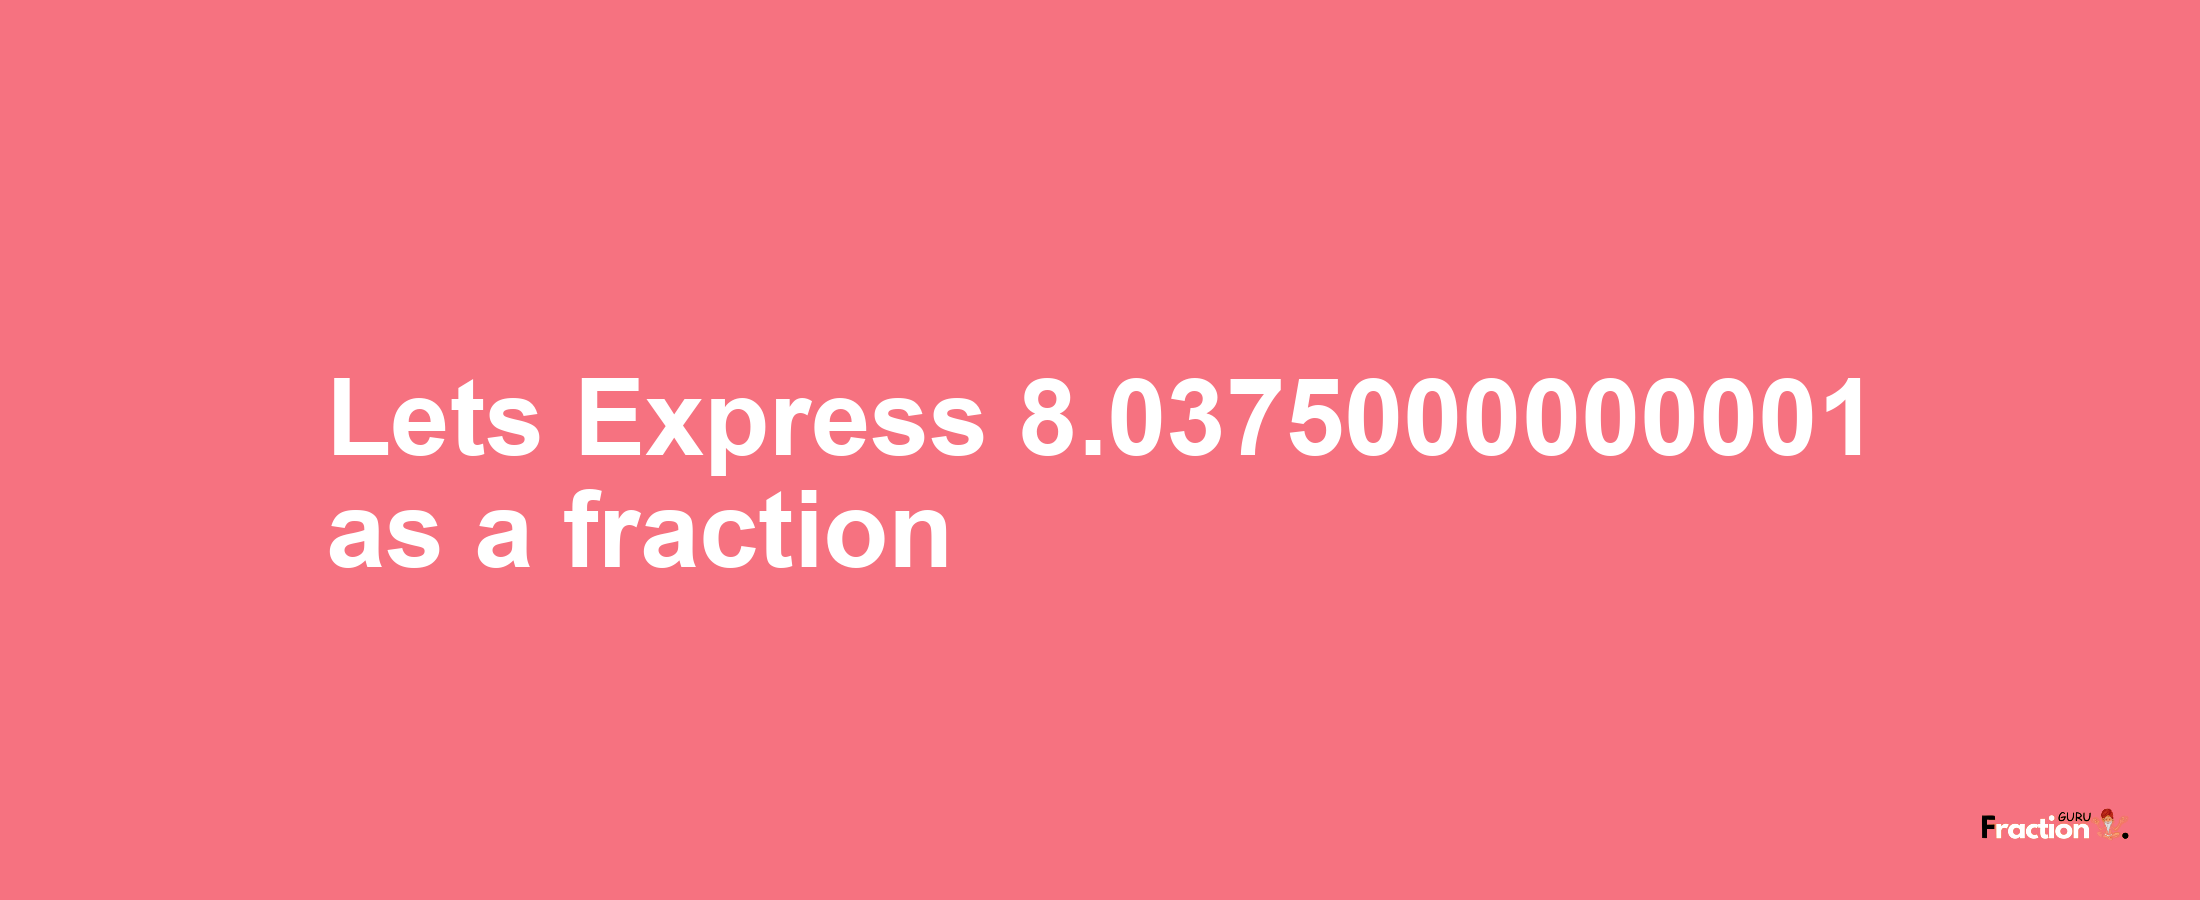 Lets Express 8.0375000000001 as afraction